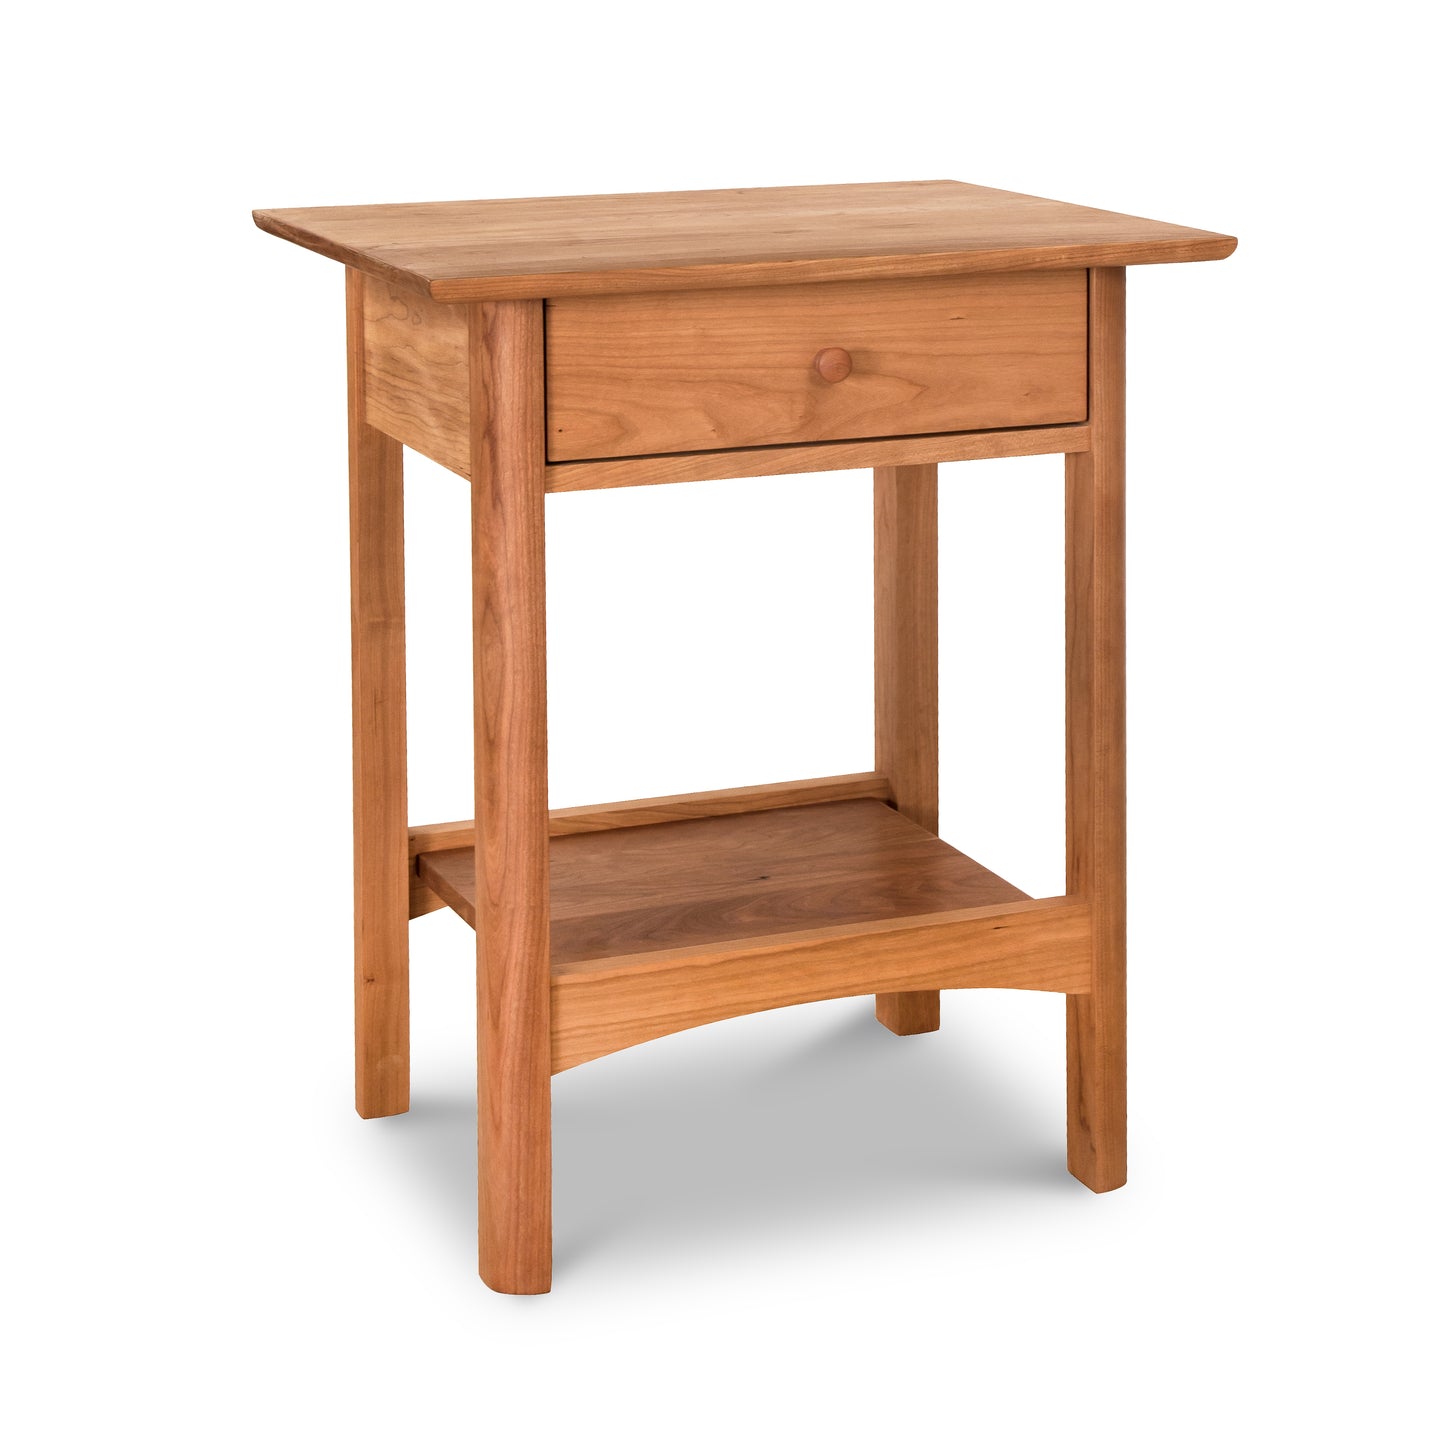 A Heartwood Shaker 1-Drawer Open Shelf Nightstand with a shelf on top. (Brand: Vermont Furniture Designs)